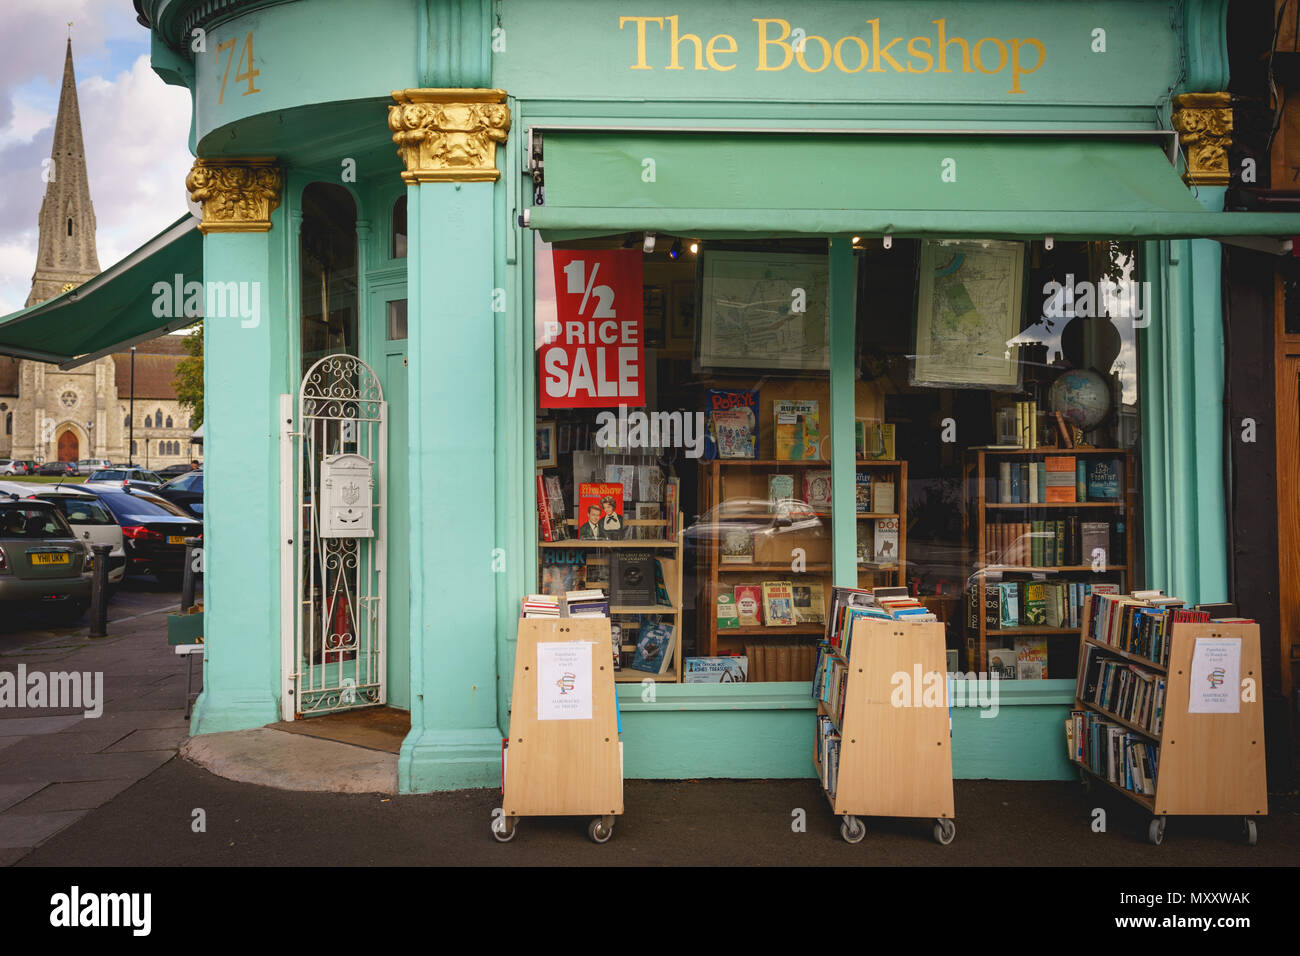 London, UK - October 2017. A vintage bookshop on the high street in Blackheath, an area in the Borough of Lewisham. Landscape format. Stock Photo